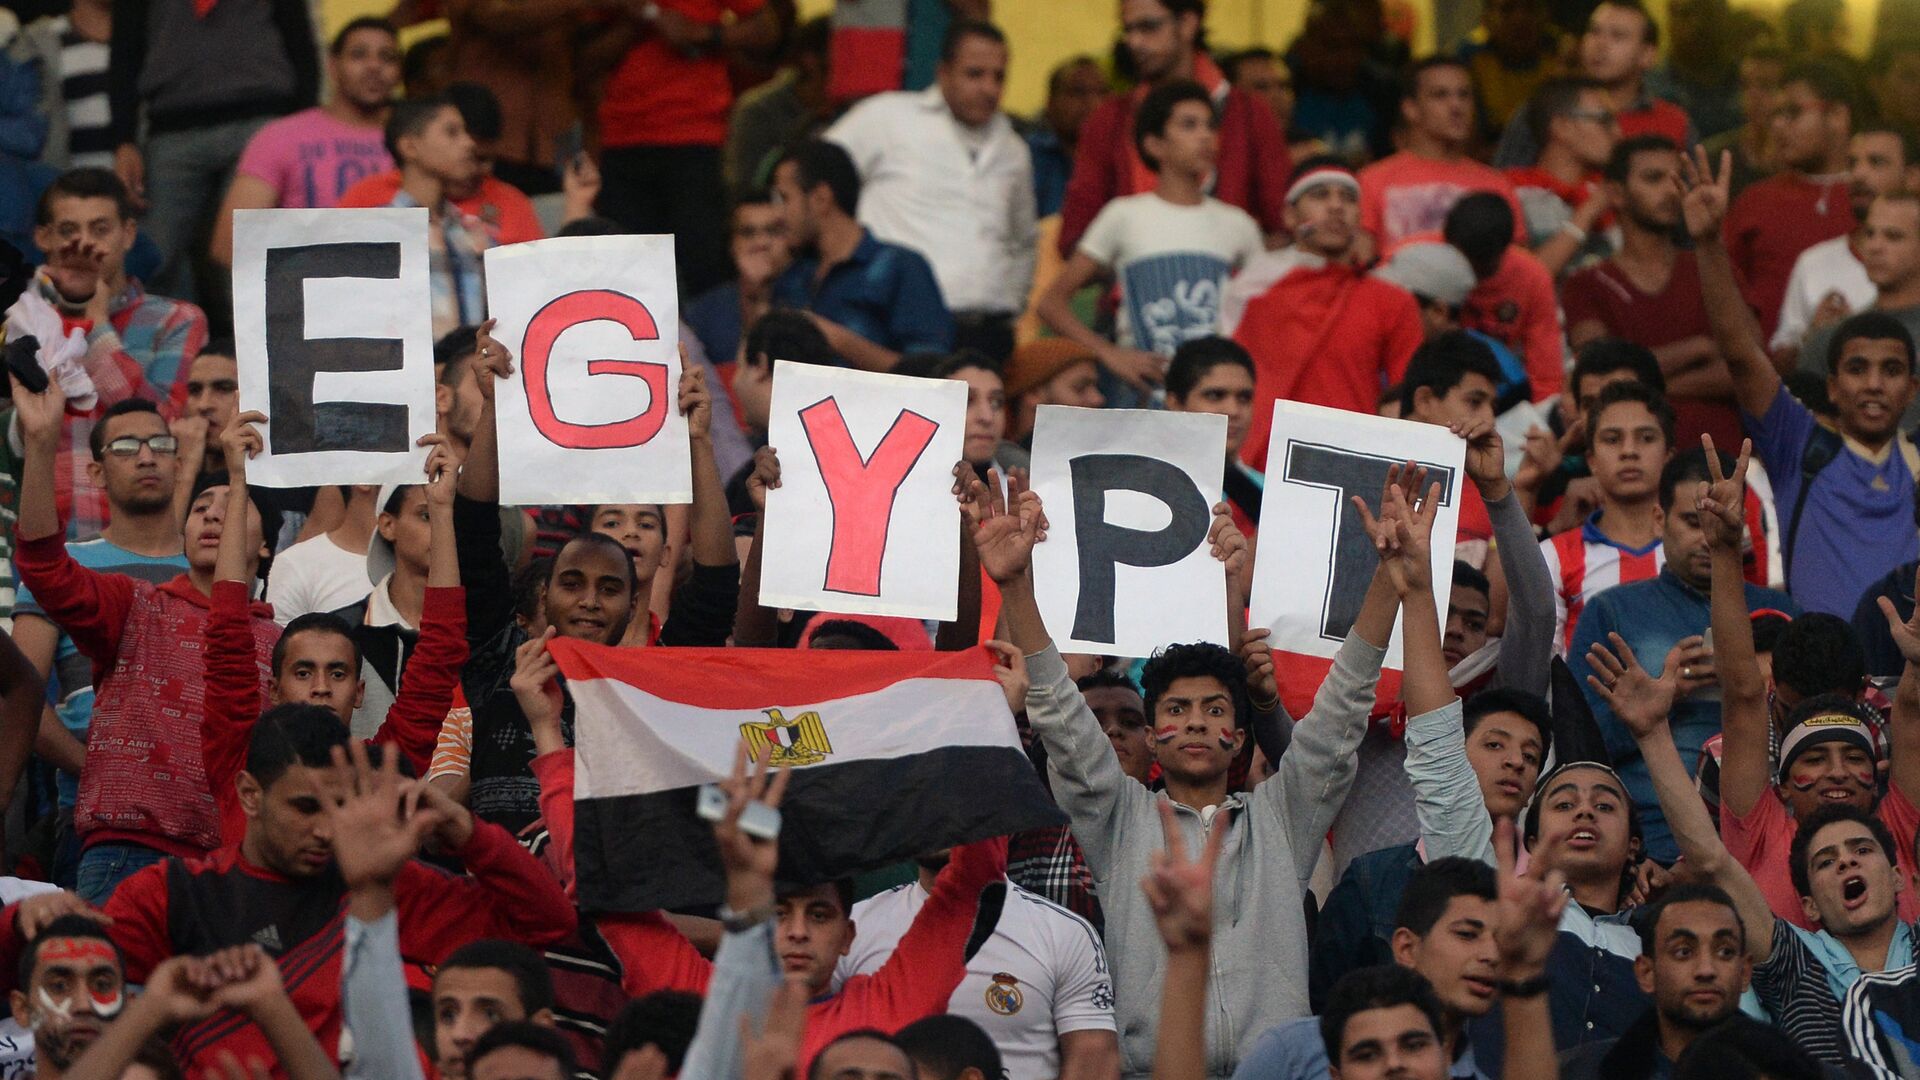 Egyptian fans carry placards and the national flag ahead of the match between Egypt and Senegal during the Africa Cup of Nations group G football match at the Cairo International Stadium in the Egyptian capital on November 15, 2014 - اسپوتنیک افغانستان  , 1920, 04.02.2022